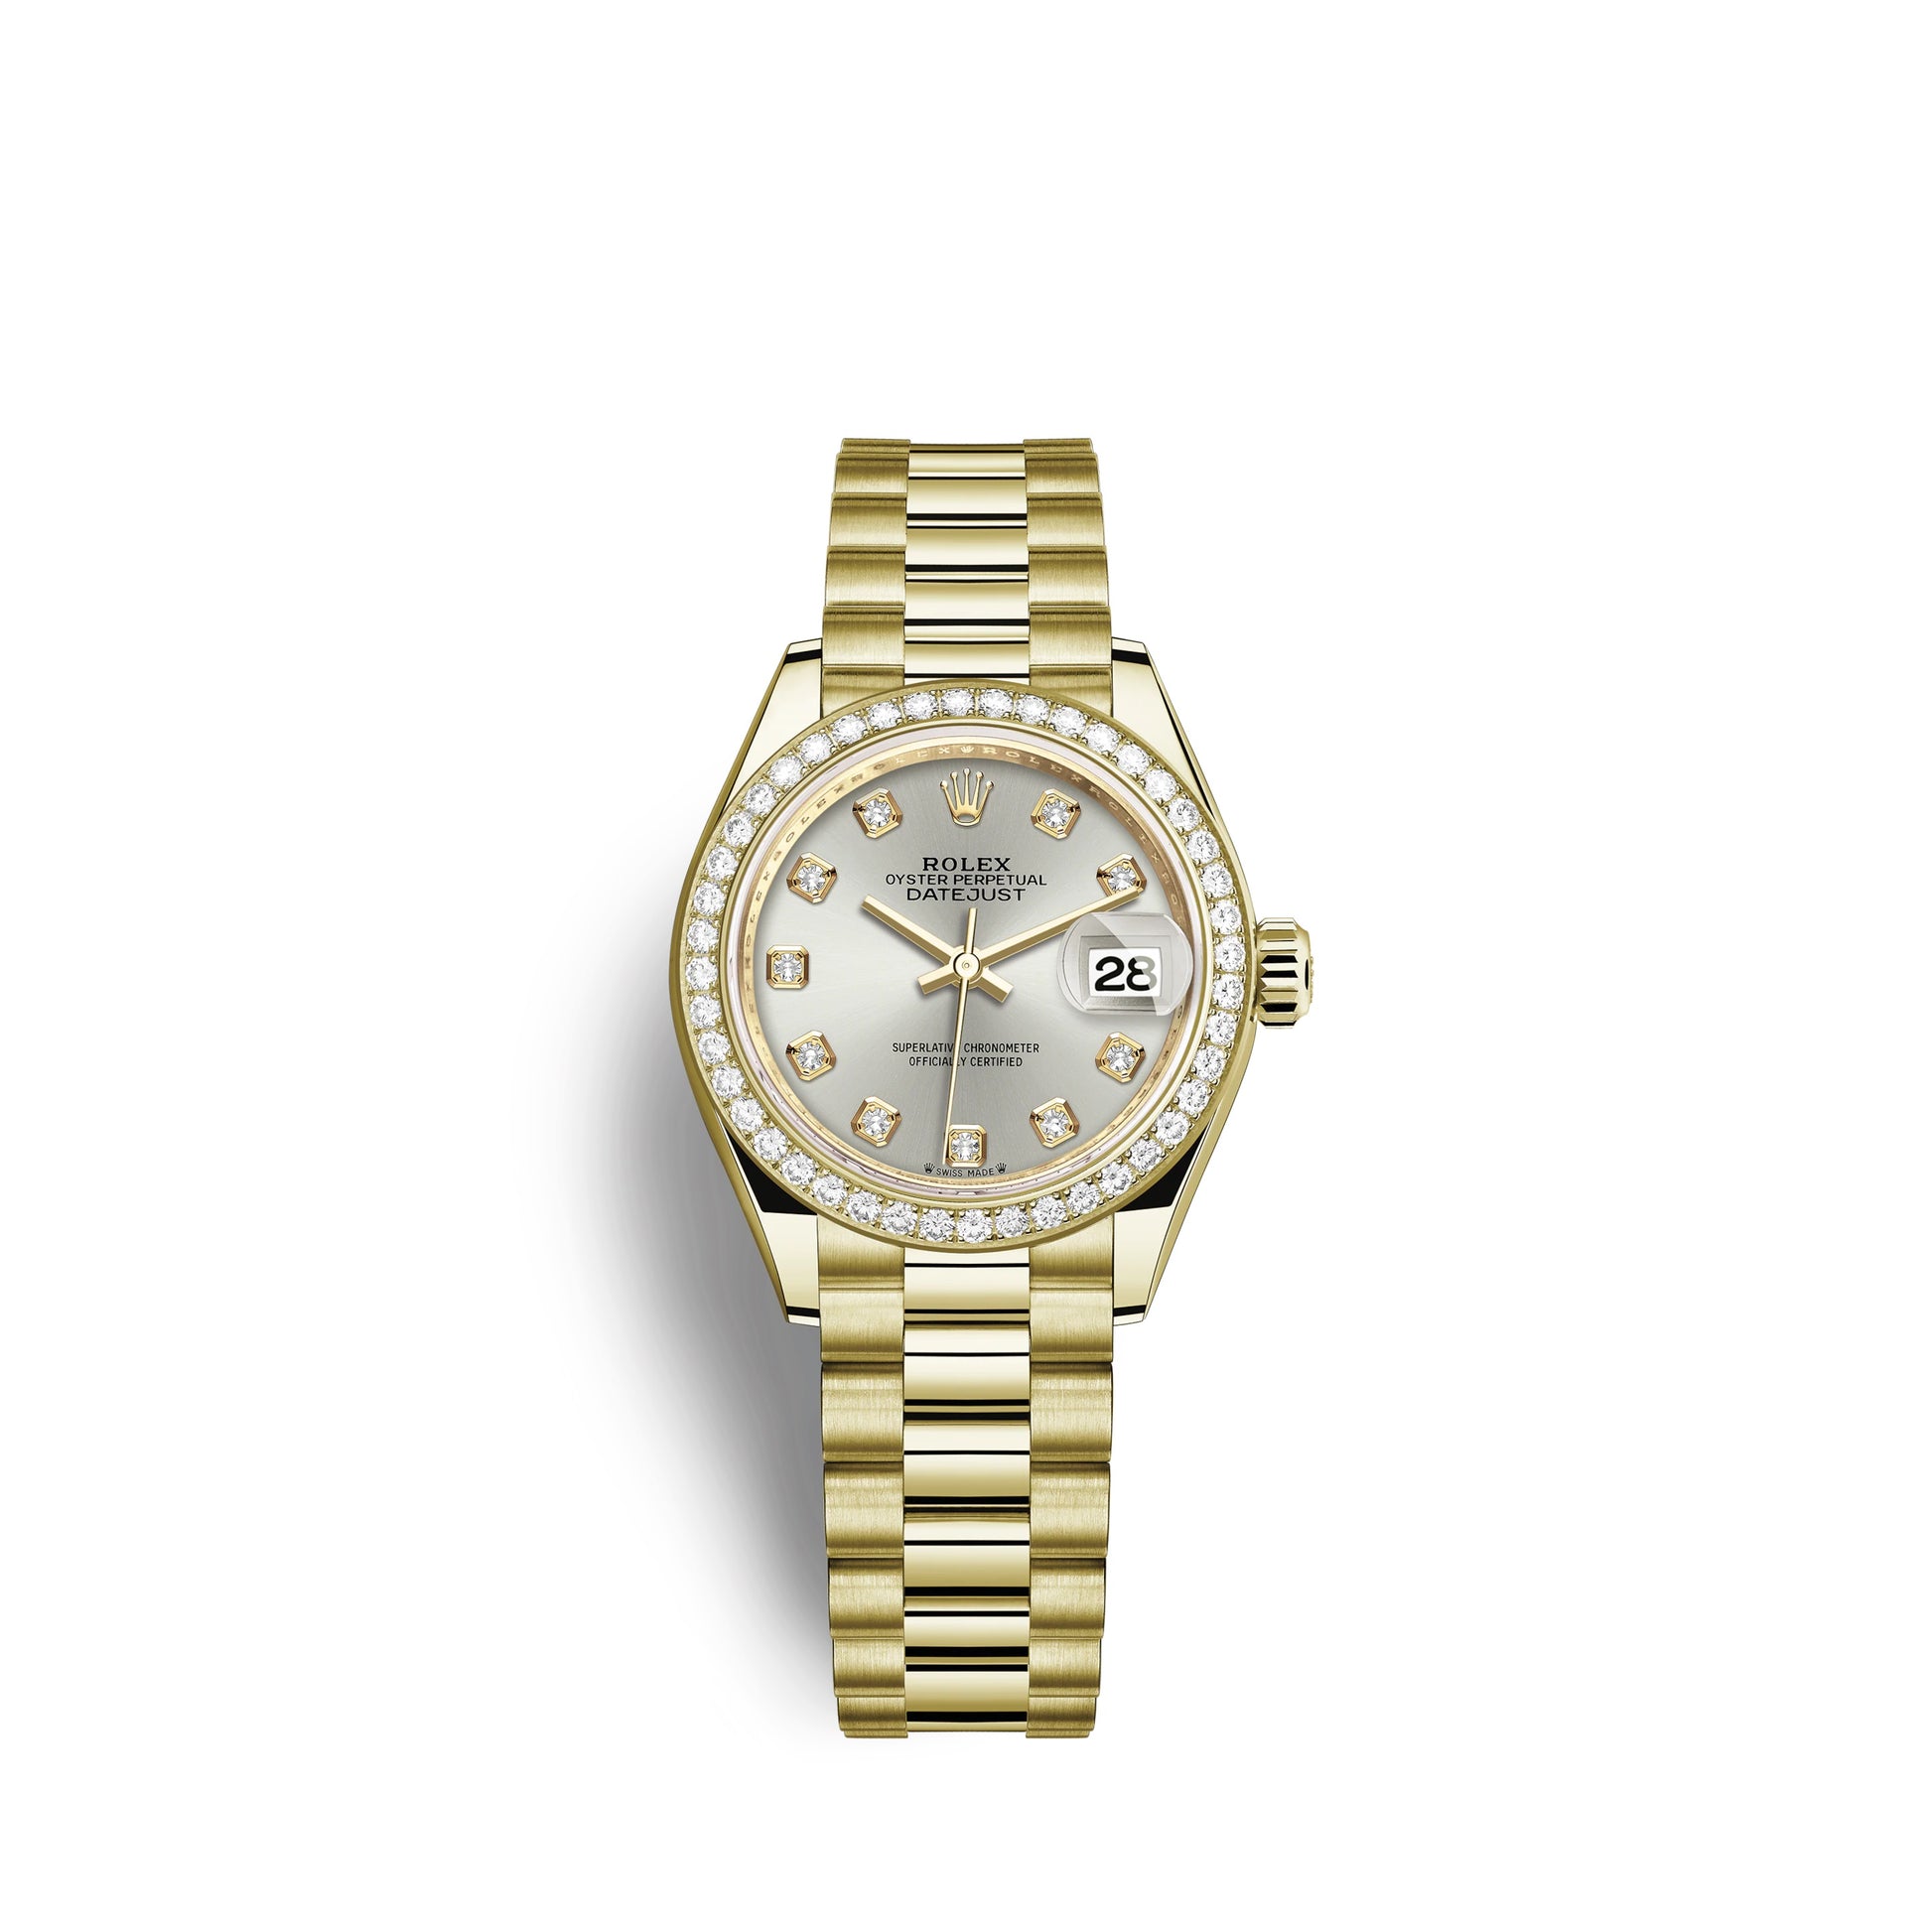 Rolex Lady-Datejust 28, 18kt Yellow Gold and diamonds, Ref# 279138RBR-0019